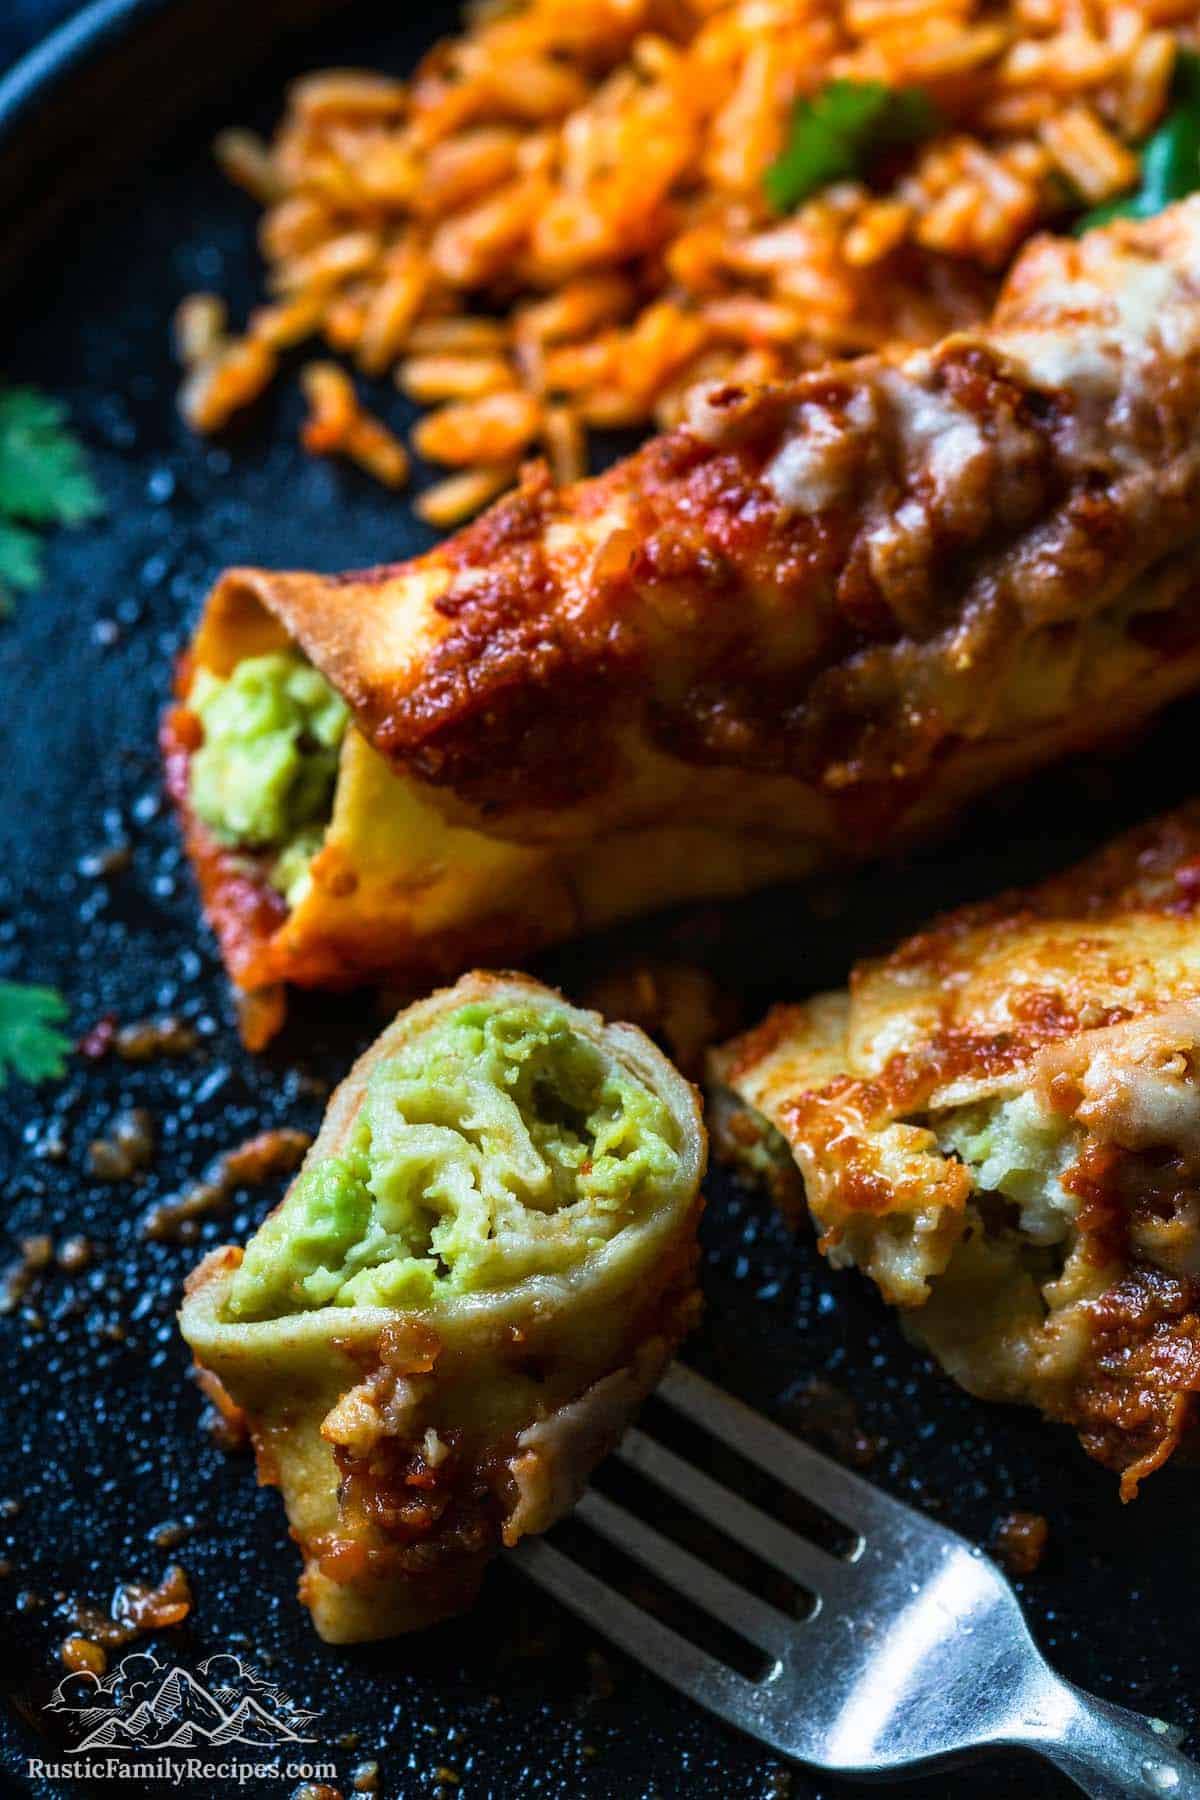 A bite of avocado enchiladas on a fork next to a plate with more food